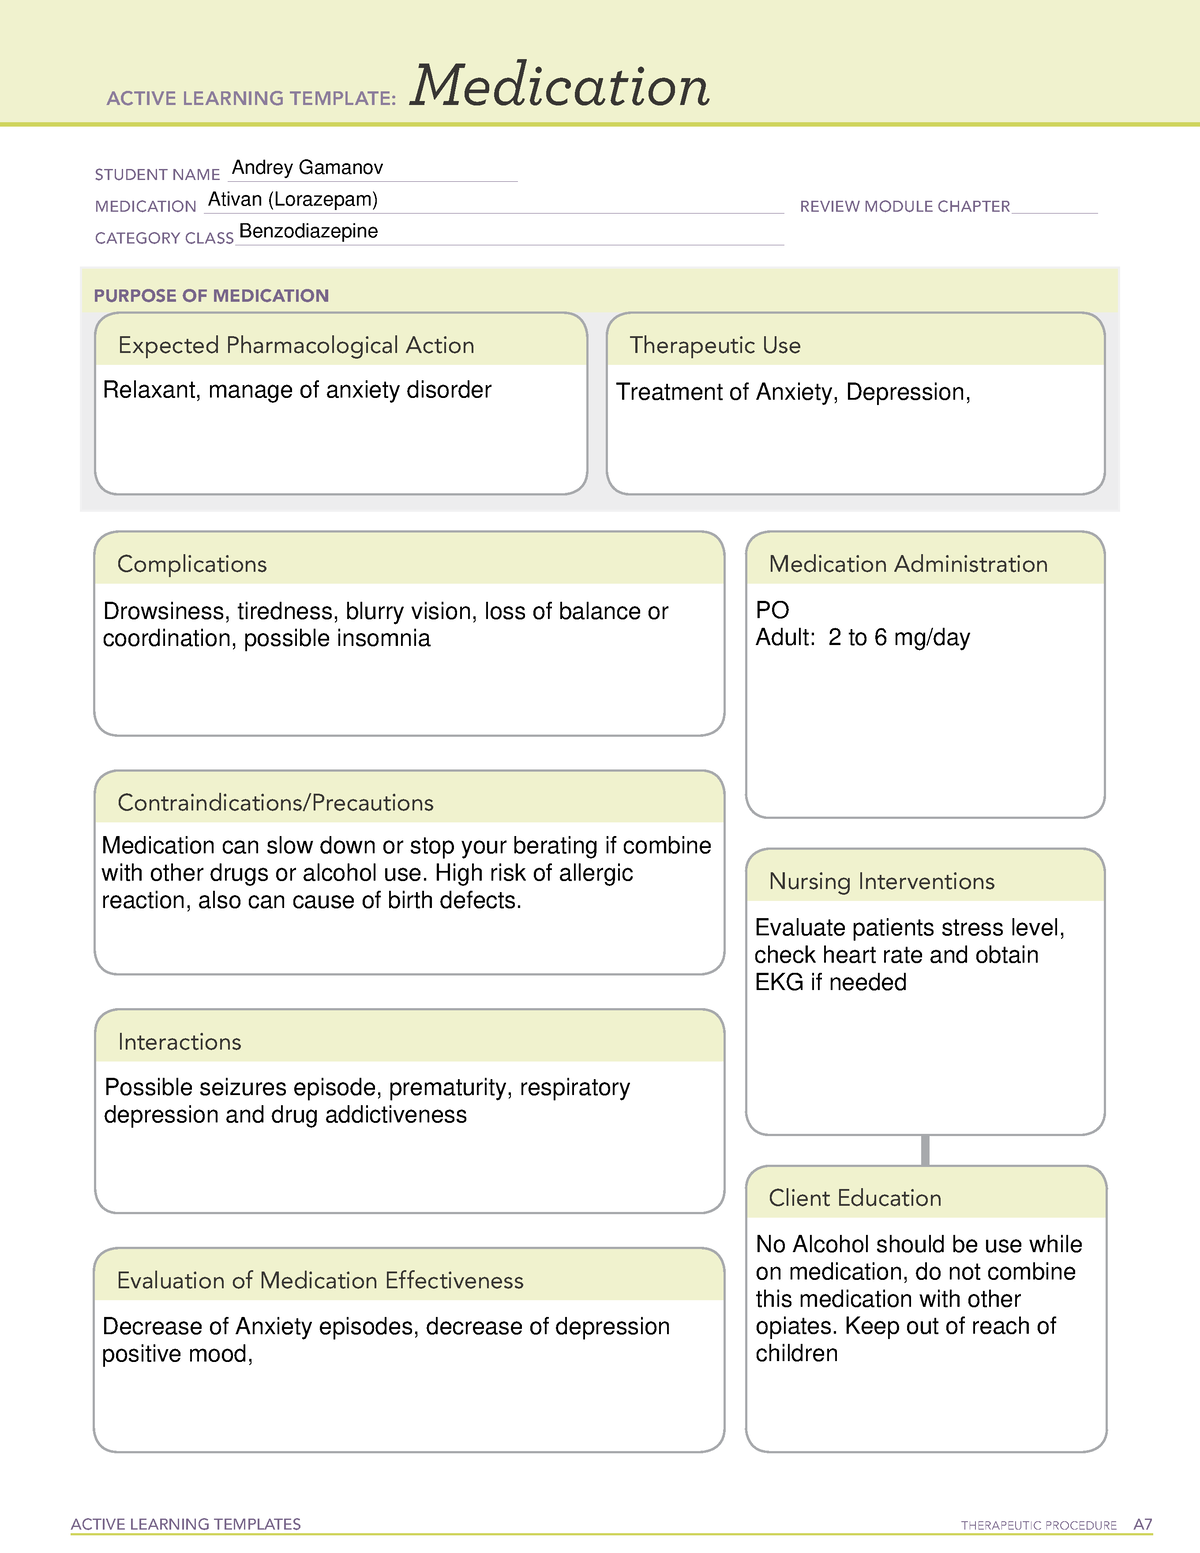 ativan-medication-active-learning-templates-therapeutic-procedure-a